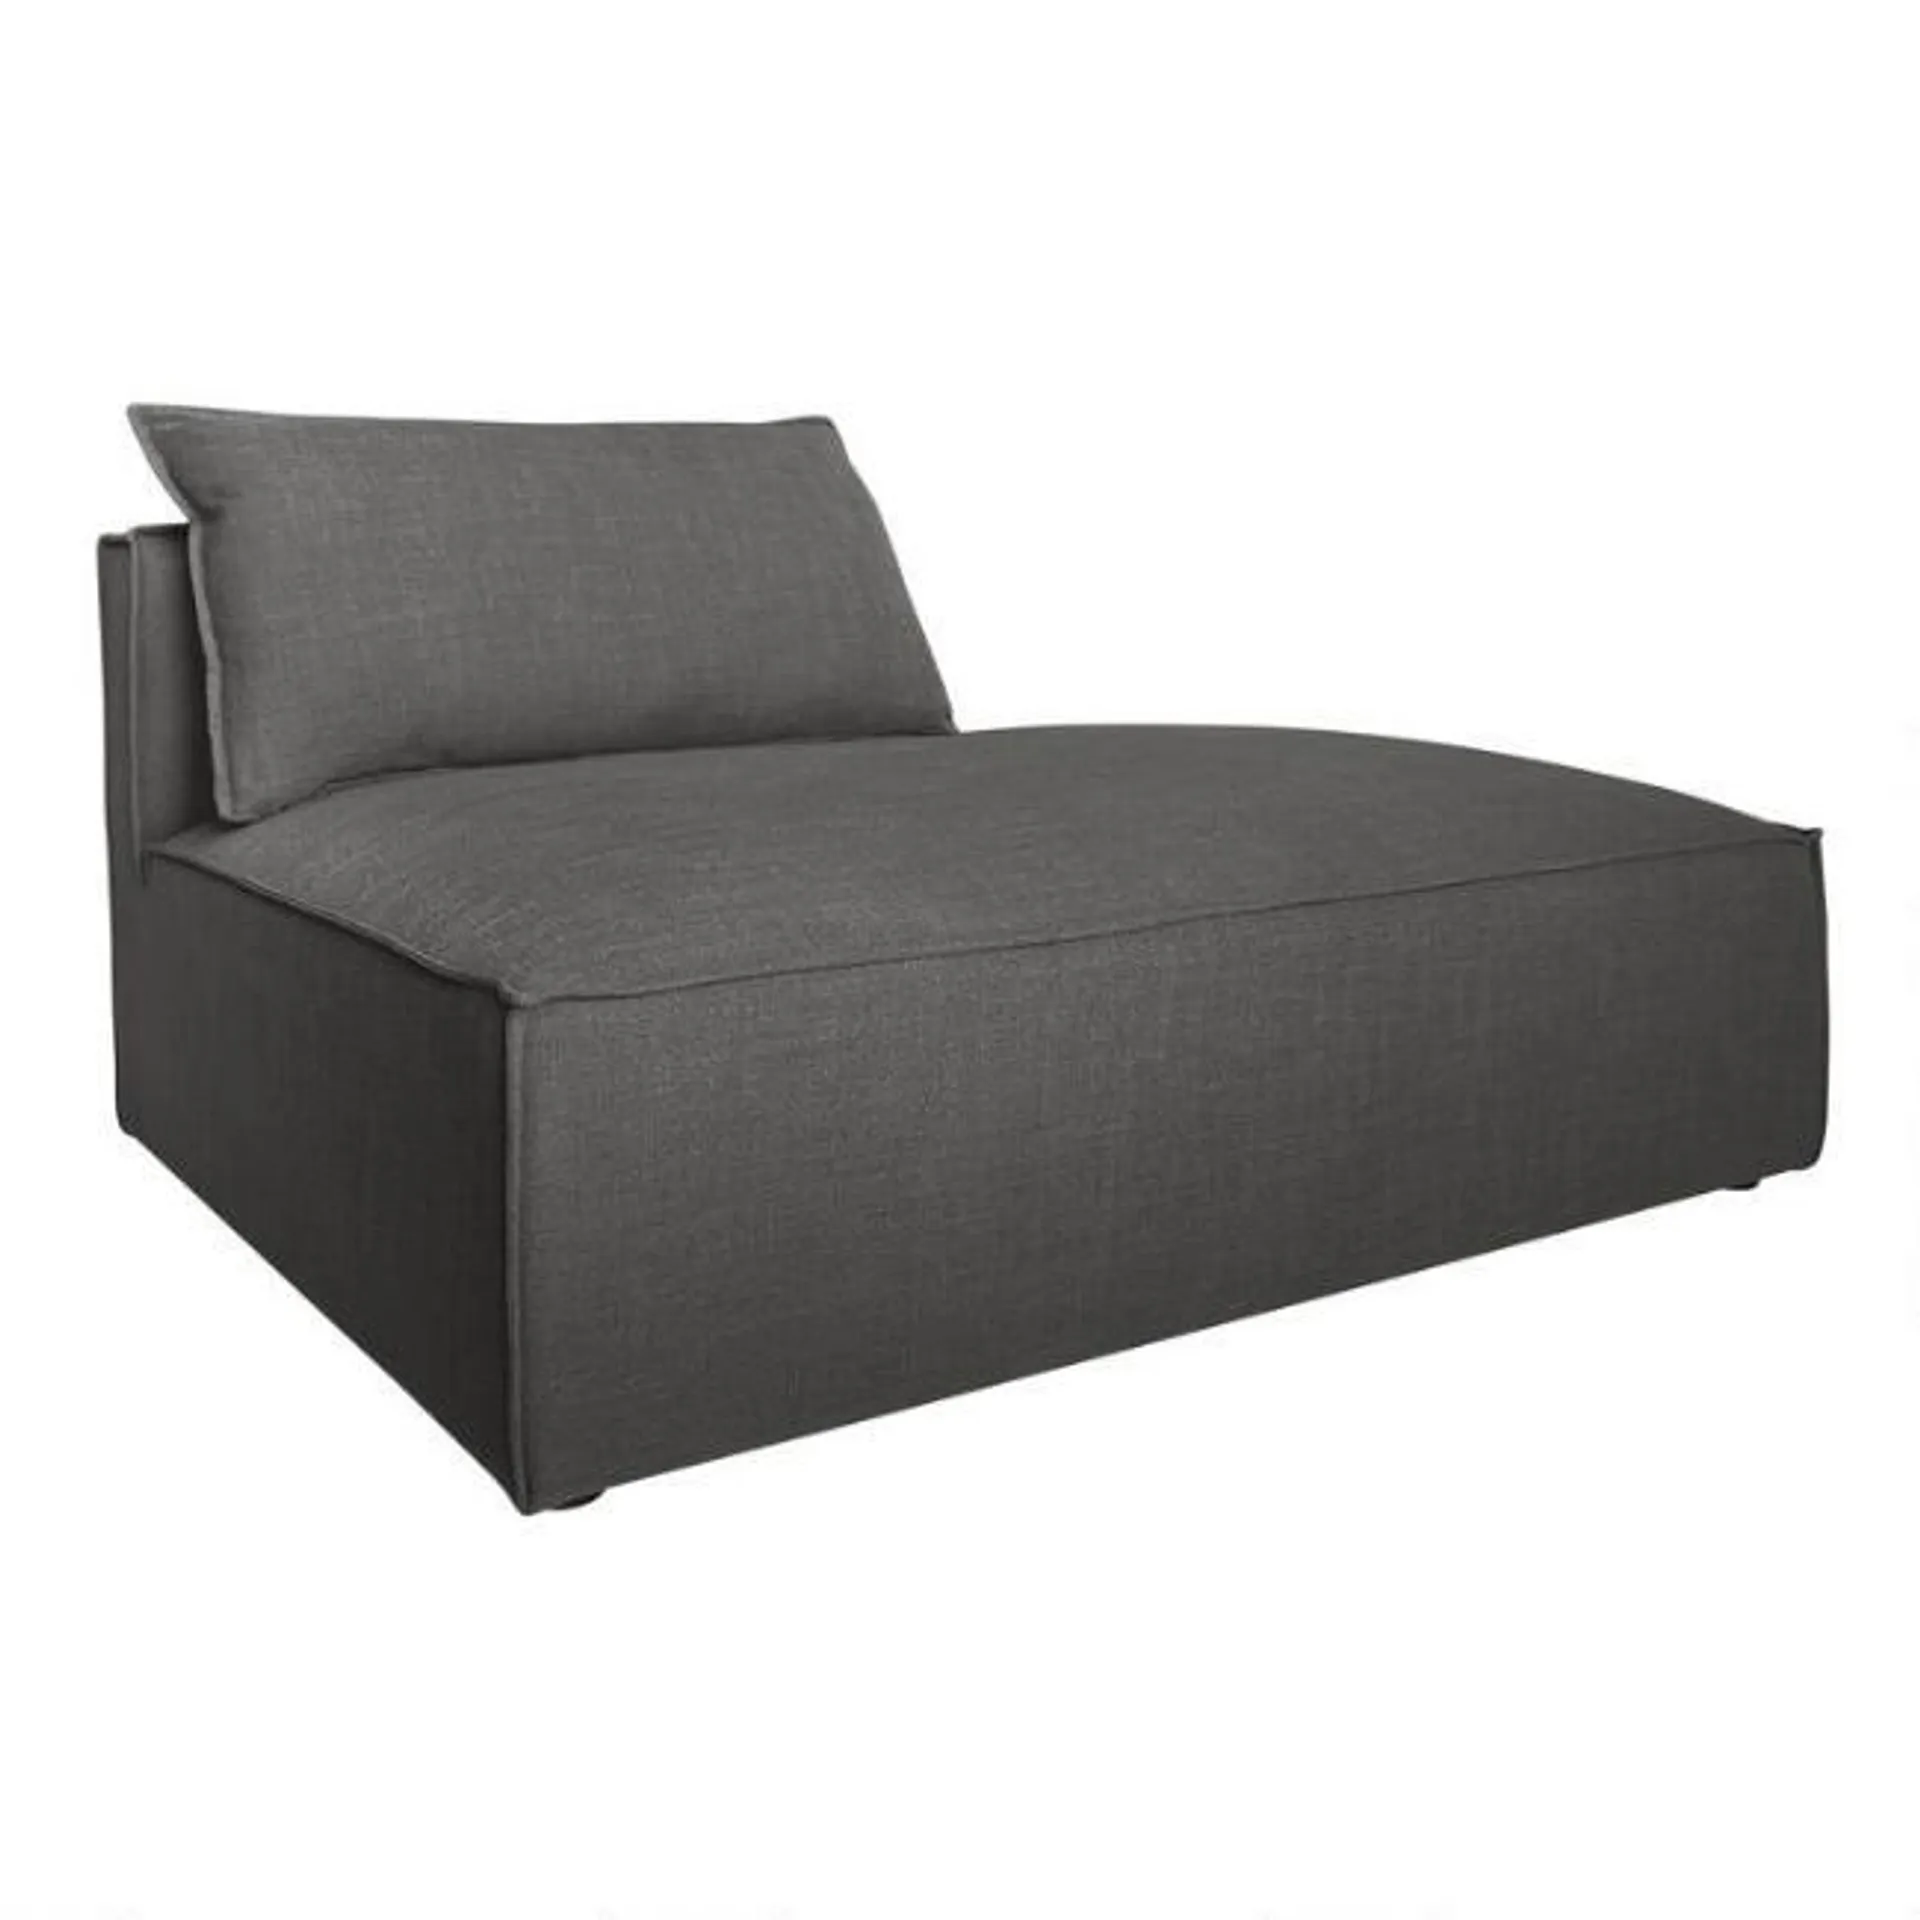 Tyson Gray Modular Sectional Right Facing Chaise Lounge